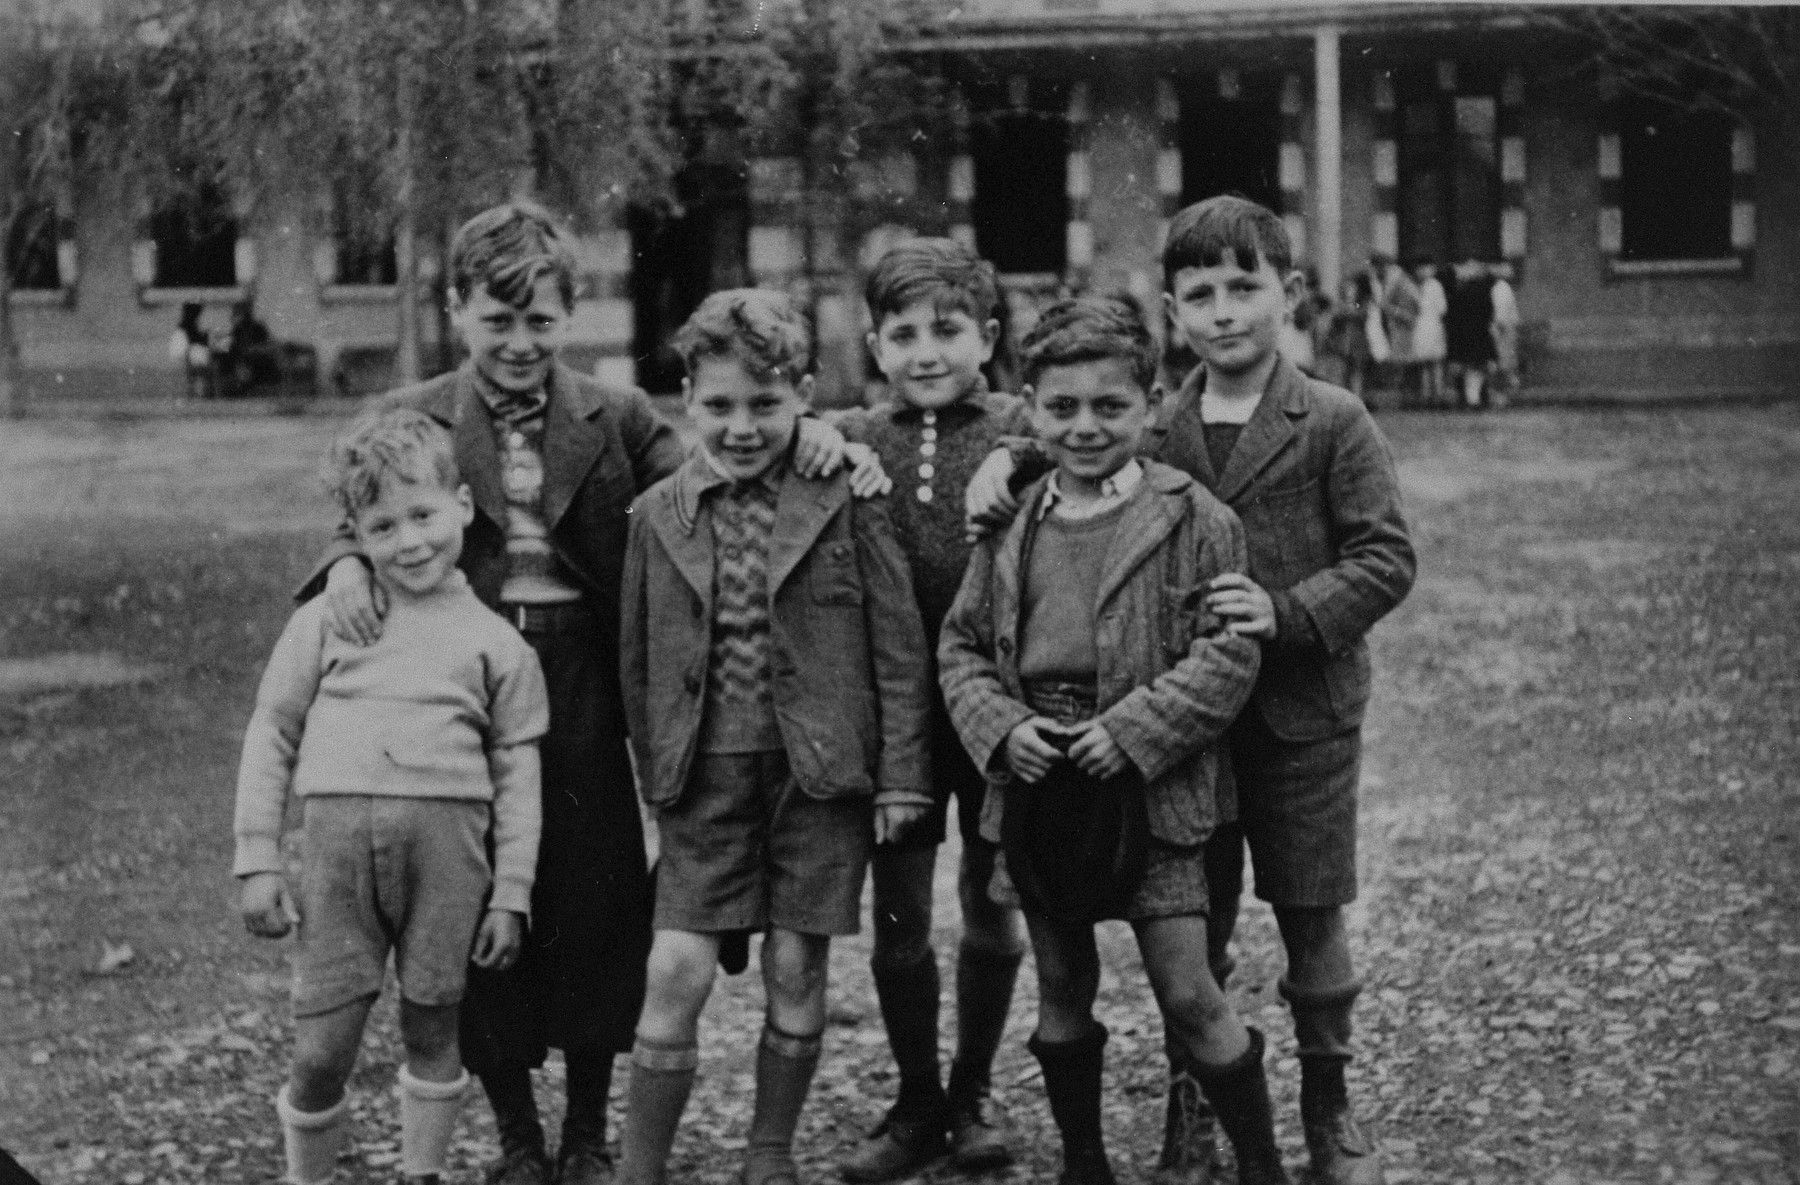 Group portrait of six German-Jewish refugee boys living at the OSE children's home, "Maison des Pupilles de la Nation," in Aspet, France.  

Pictured from left to right are:  Ernst Weilheimer, Richard Weilheimer, Rolf Hess, Hugo Schiller, Hjalmar Maurer and Kurt Walker.

These boys were brought to Aspet from French transit camps with the assistance of the American Friends Service Committee (AFSC) and the Oeuvre de secours aux enfants (OSE).  The AFSC later secured their passage to the United States.